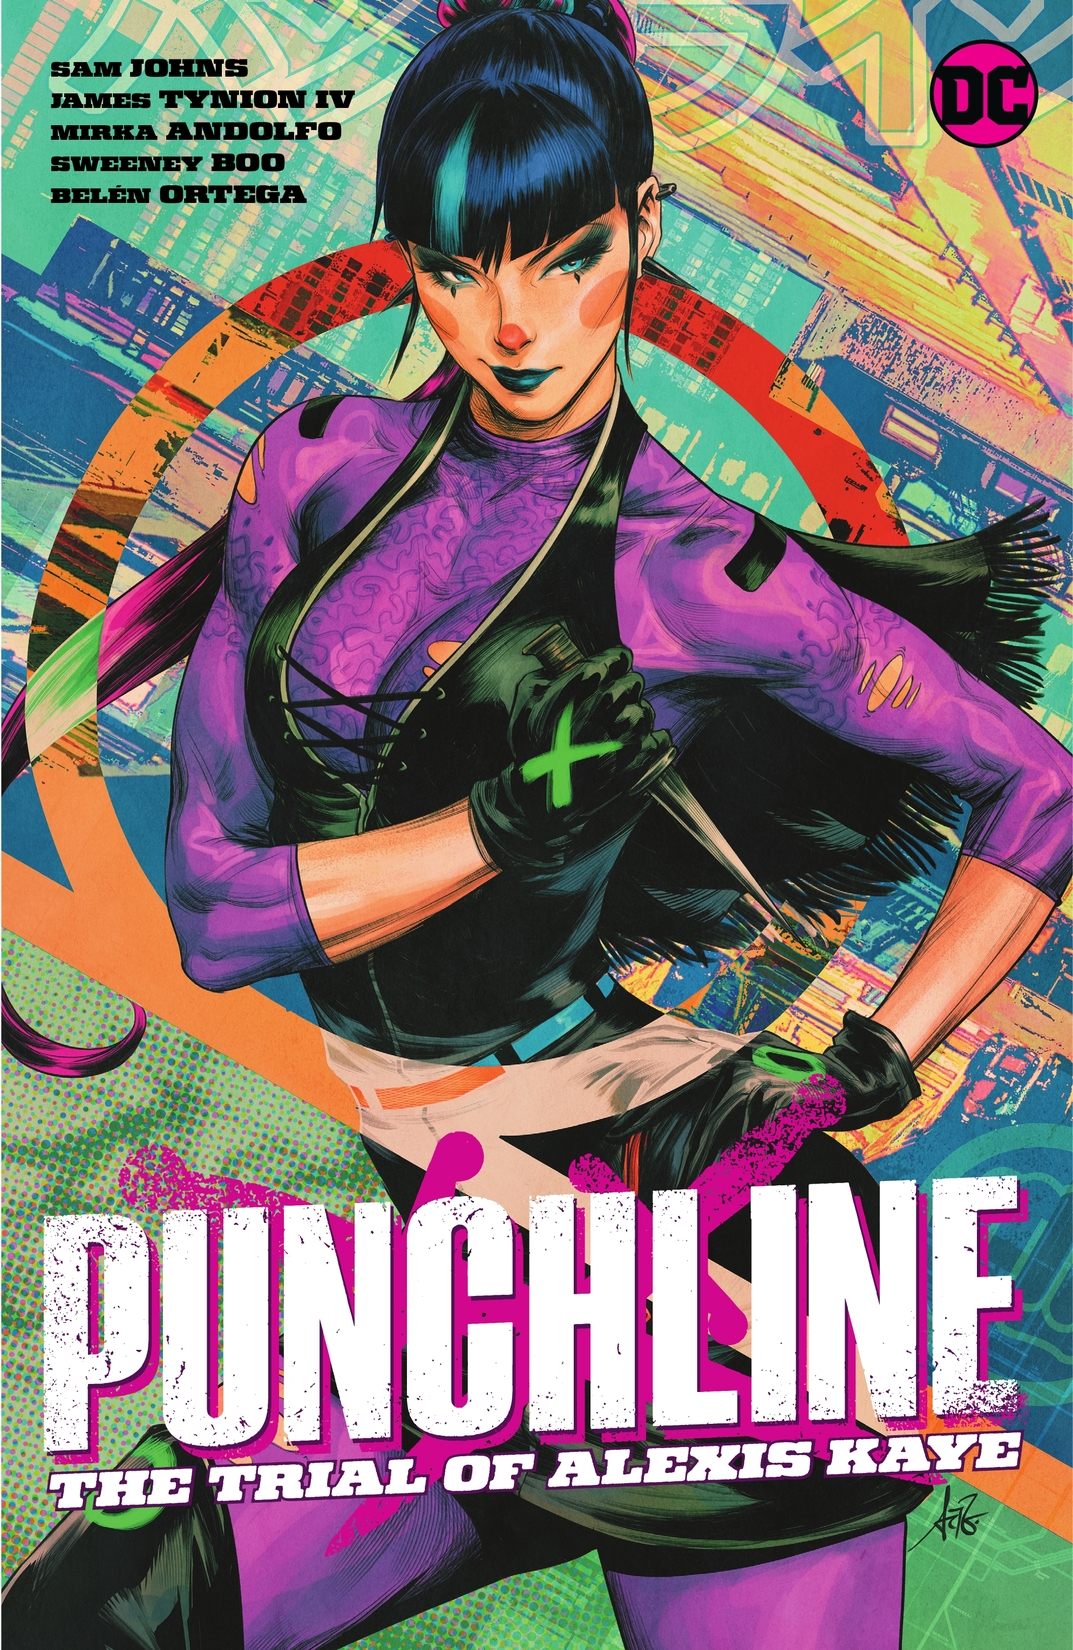 Punchline: The Trial of Alexis Kaye - #0001 preview images